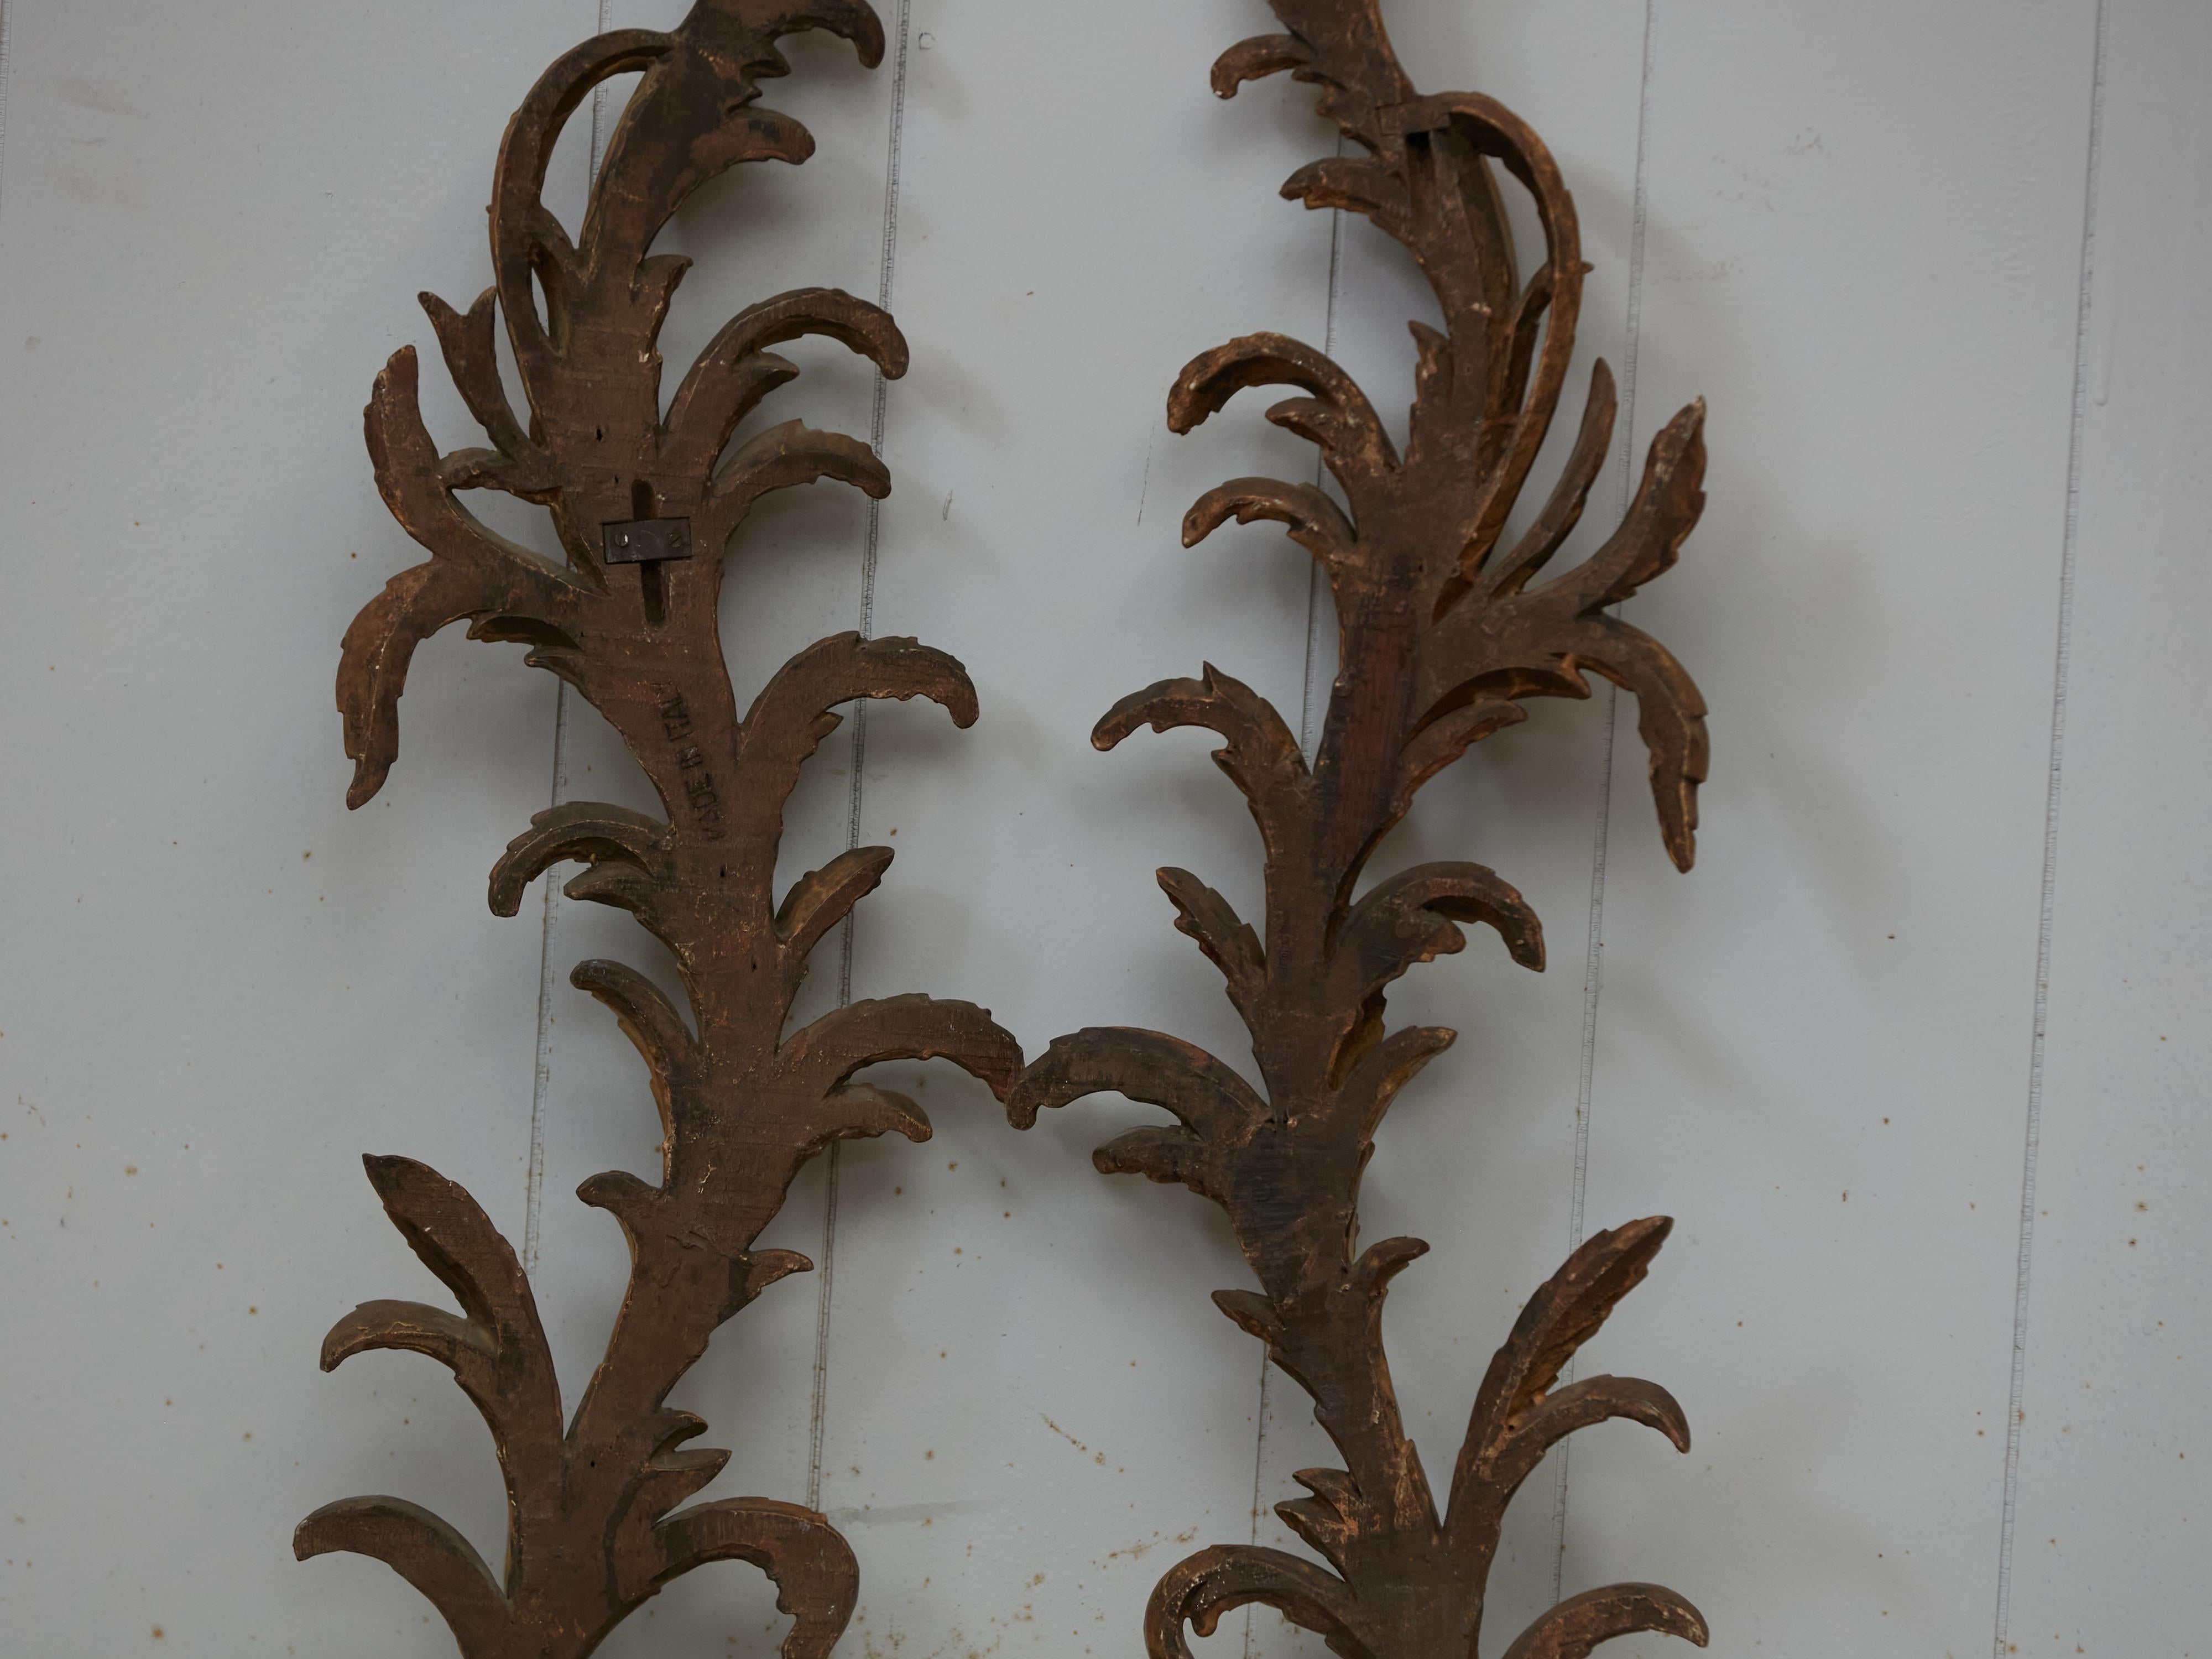 Pair of Italian 1820s Carved Giltwood Wall Fragments Depicting Scrolling Foliage For Sale 3